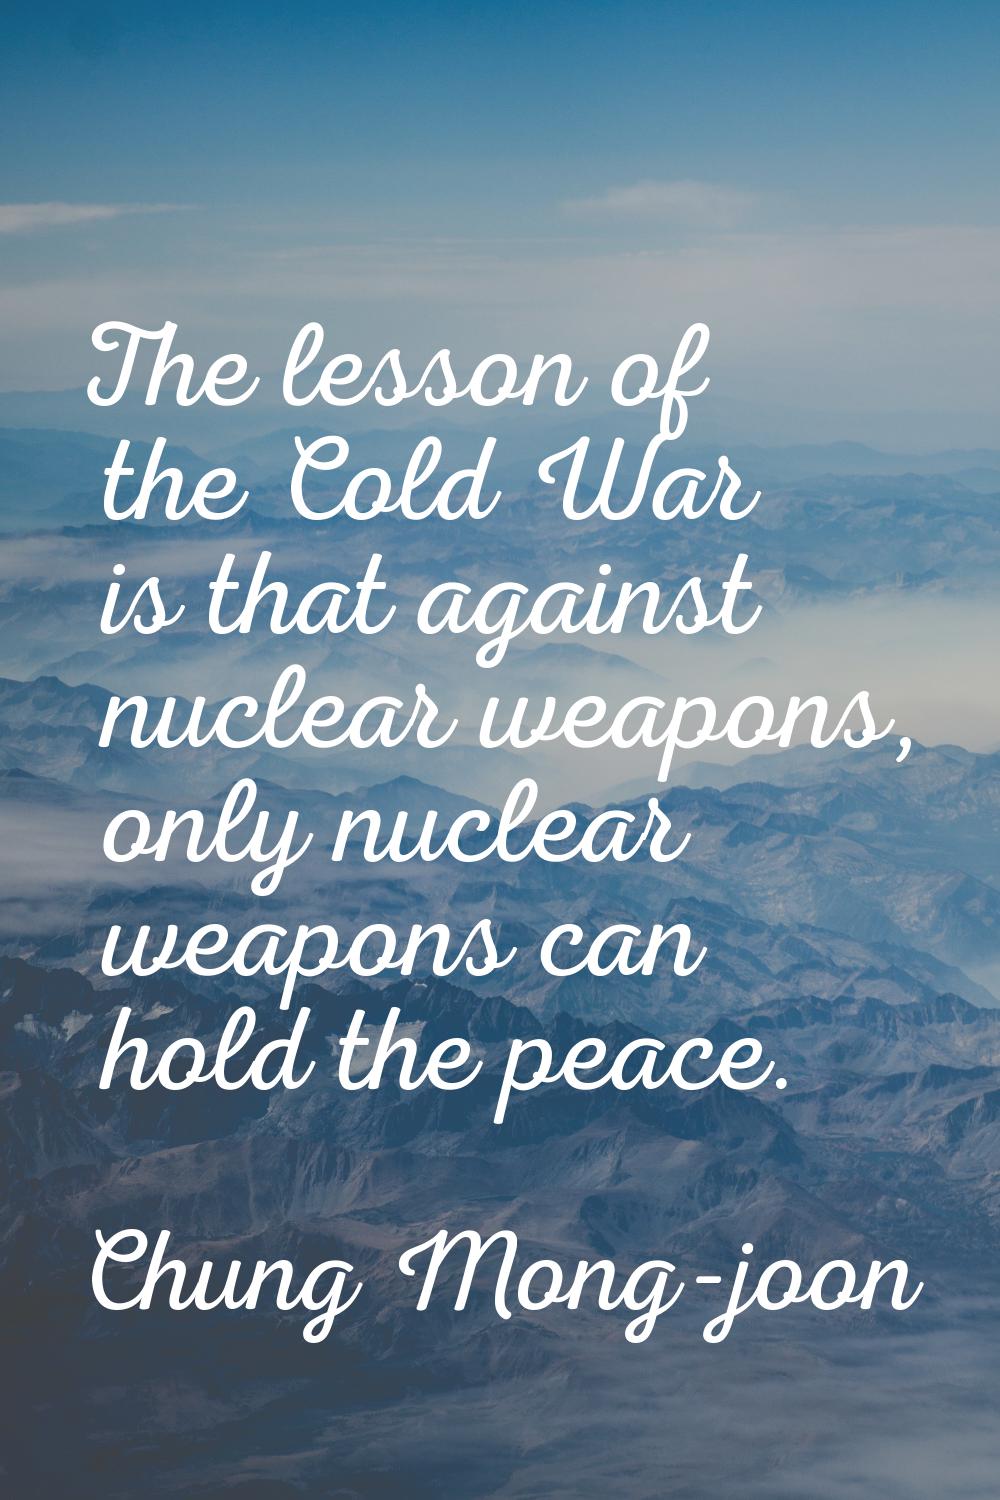 The lesson of the Cold War is that against nuclear weapons, only nuclear weapons can hold the peace